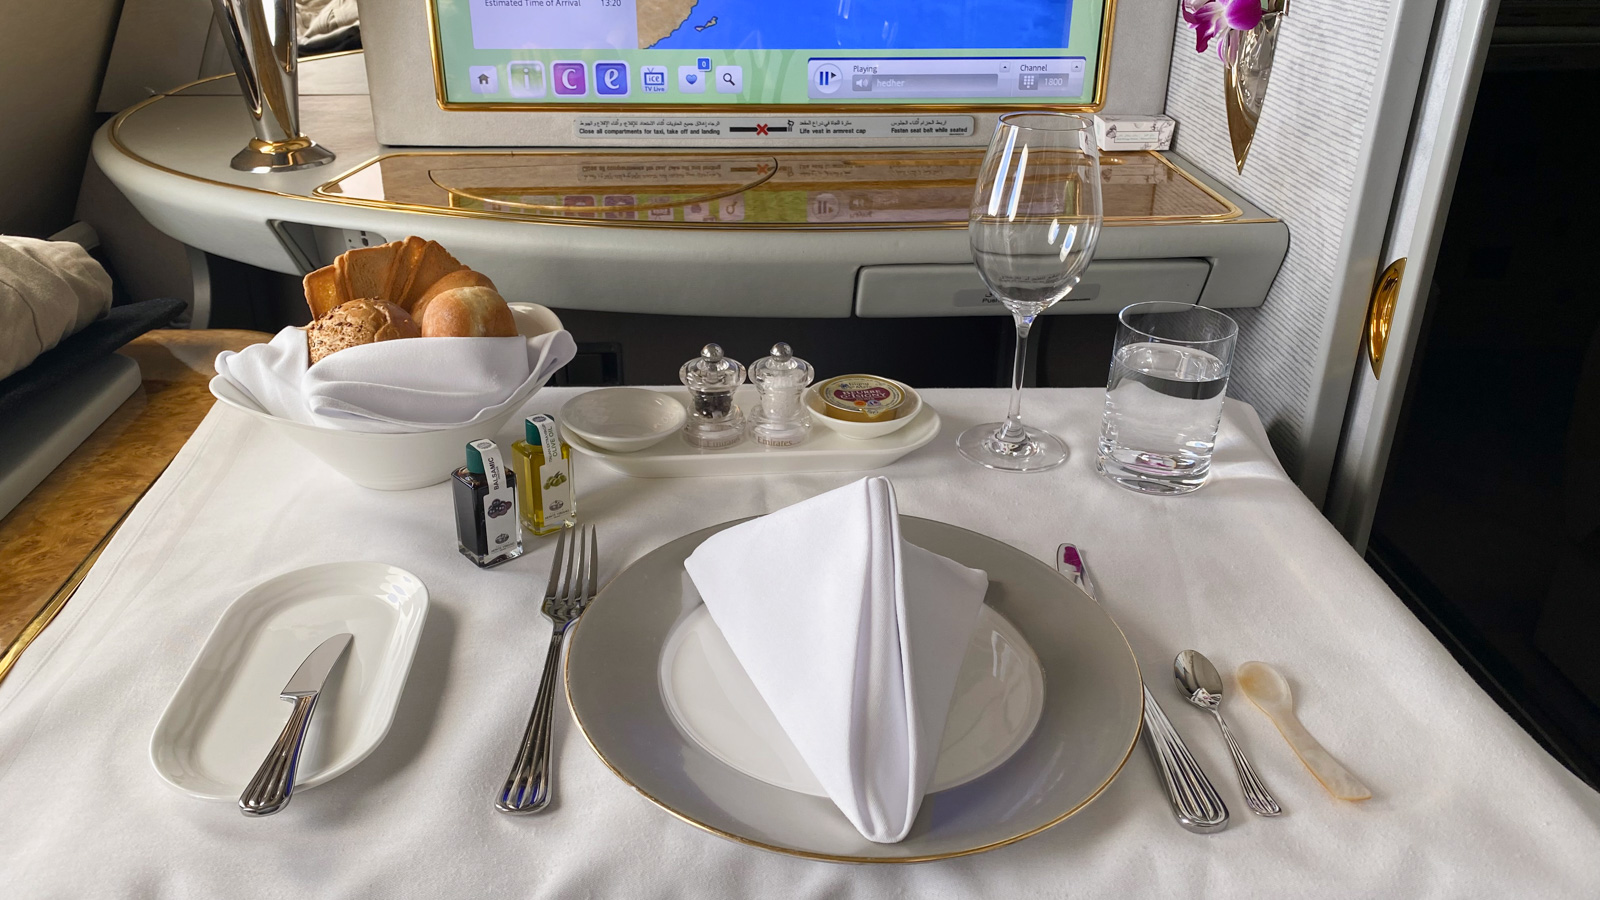 Emirates First Class table setting